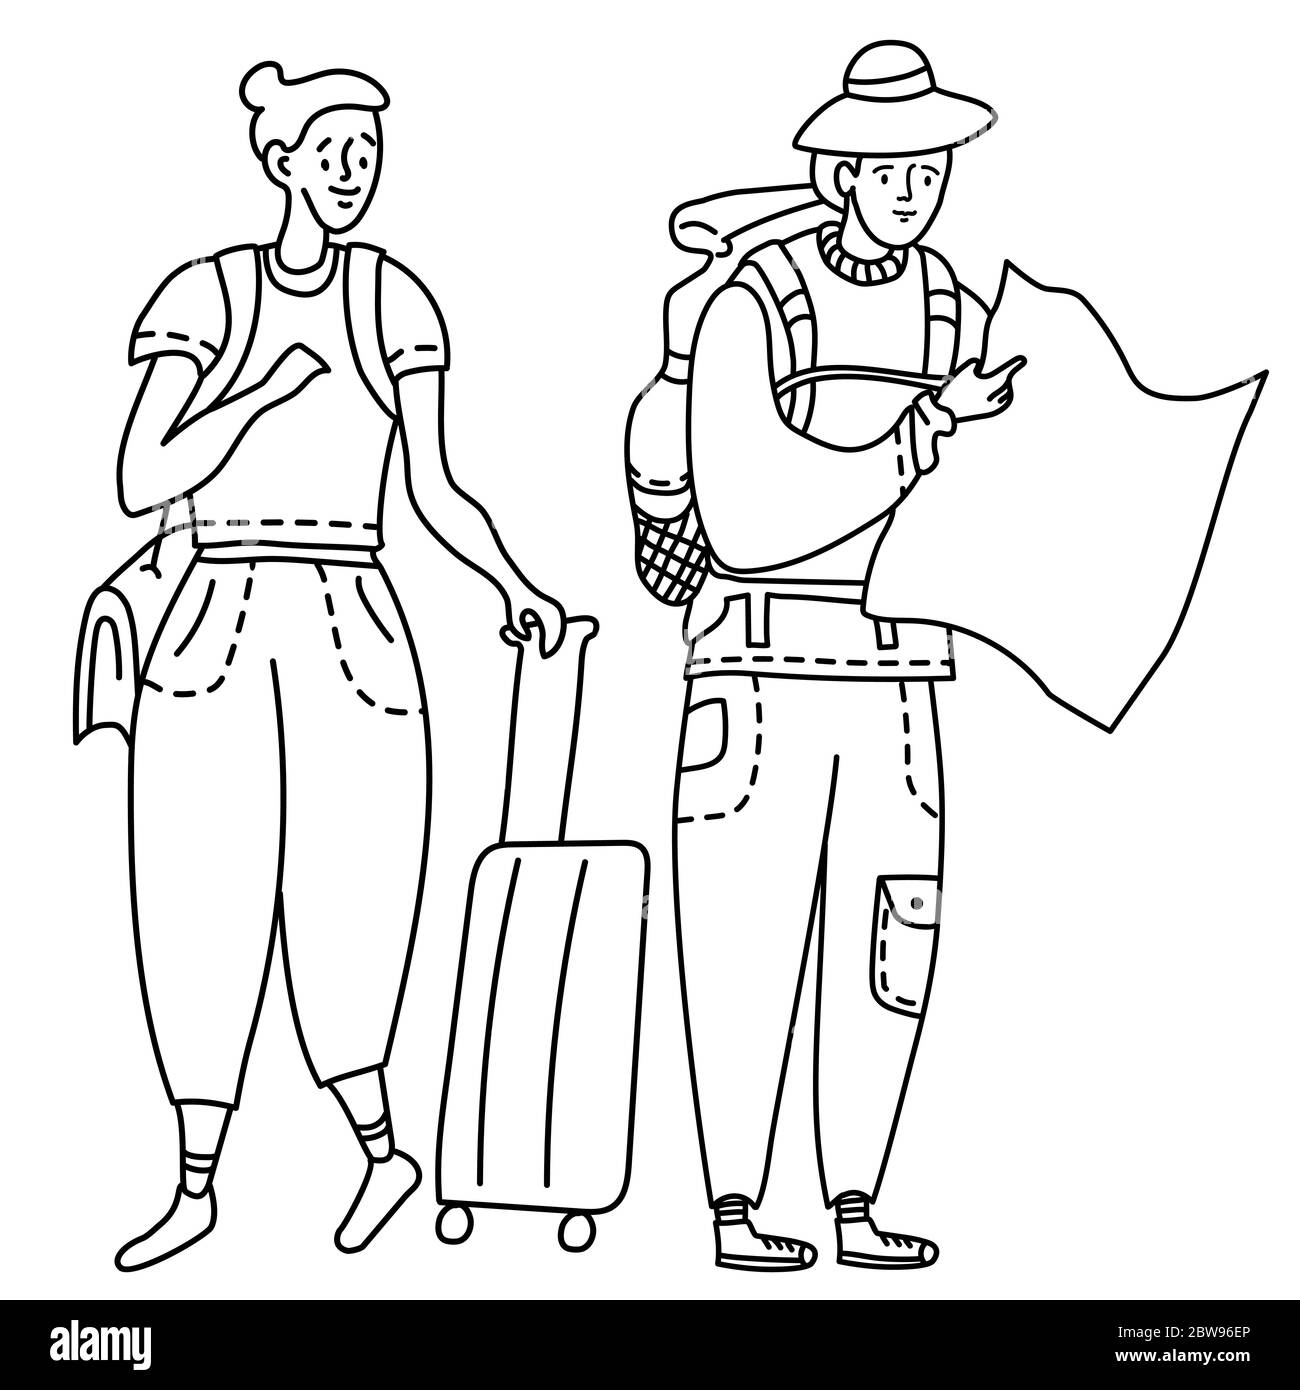 Linear drawing doodles girl and guy tourists. She has a bag on her shoulder and a suitcase on wheels. He is with a backpack and a map in his hands Stock Vector